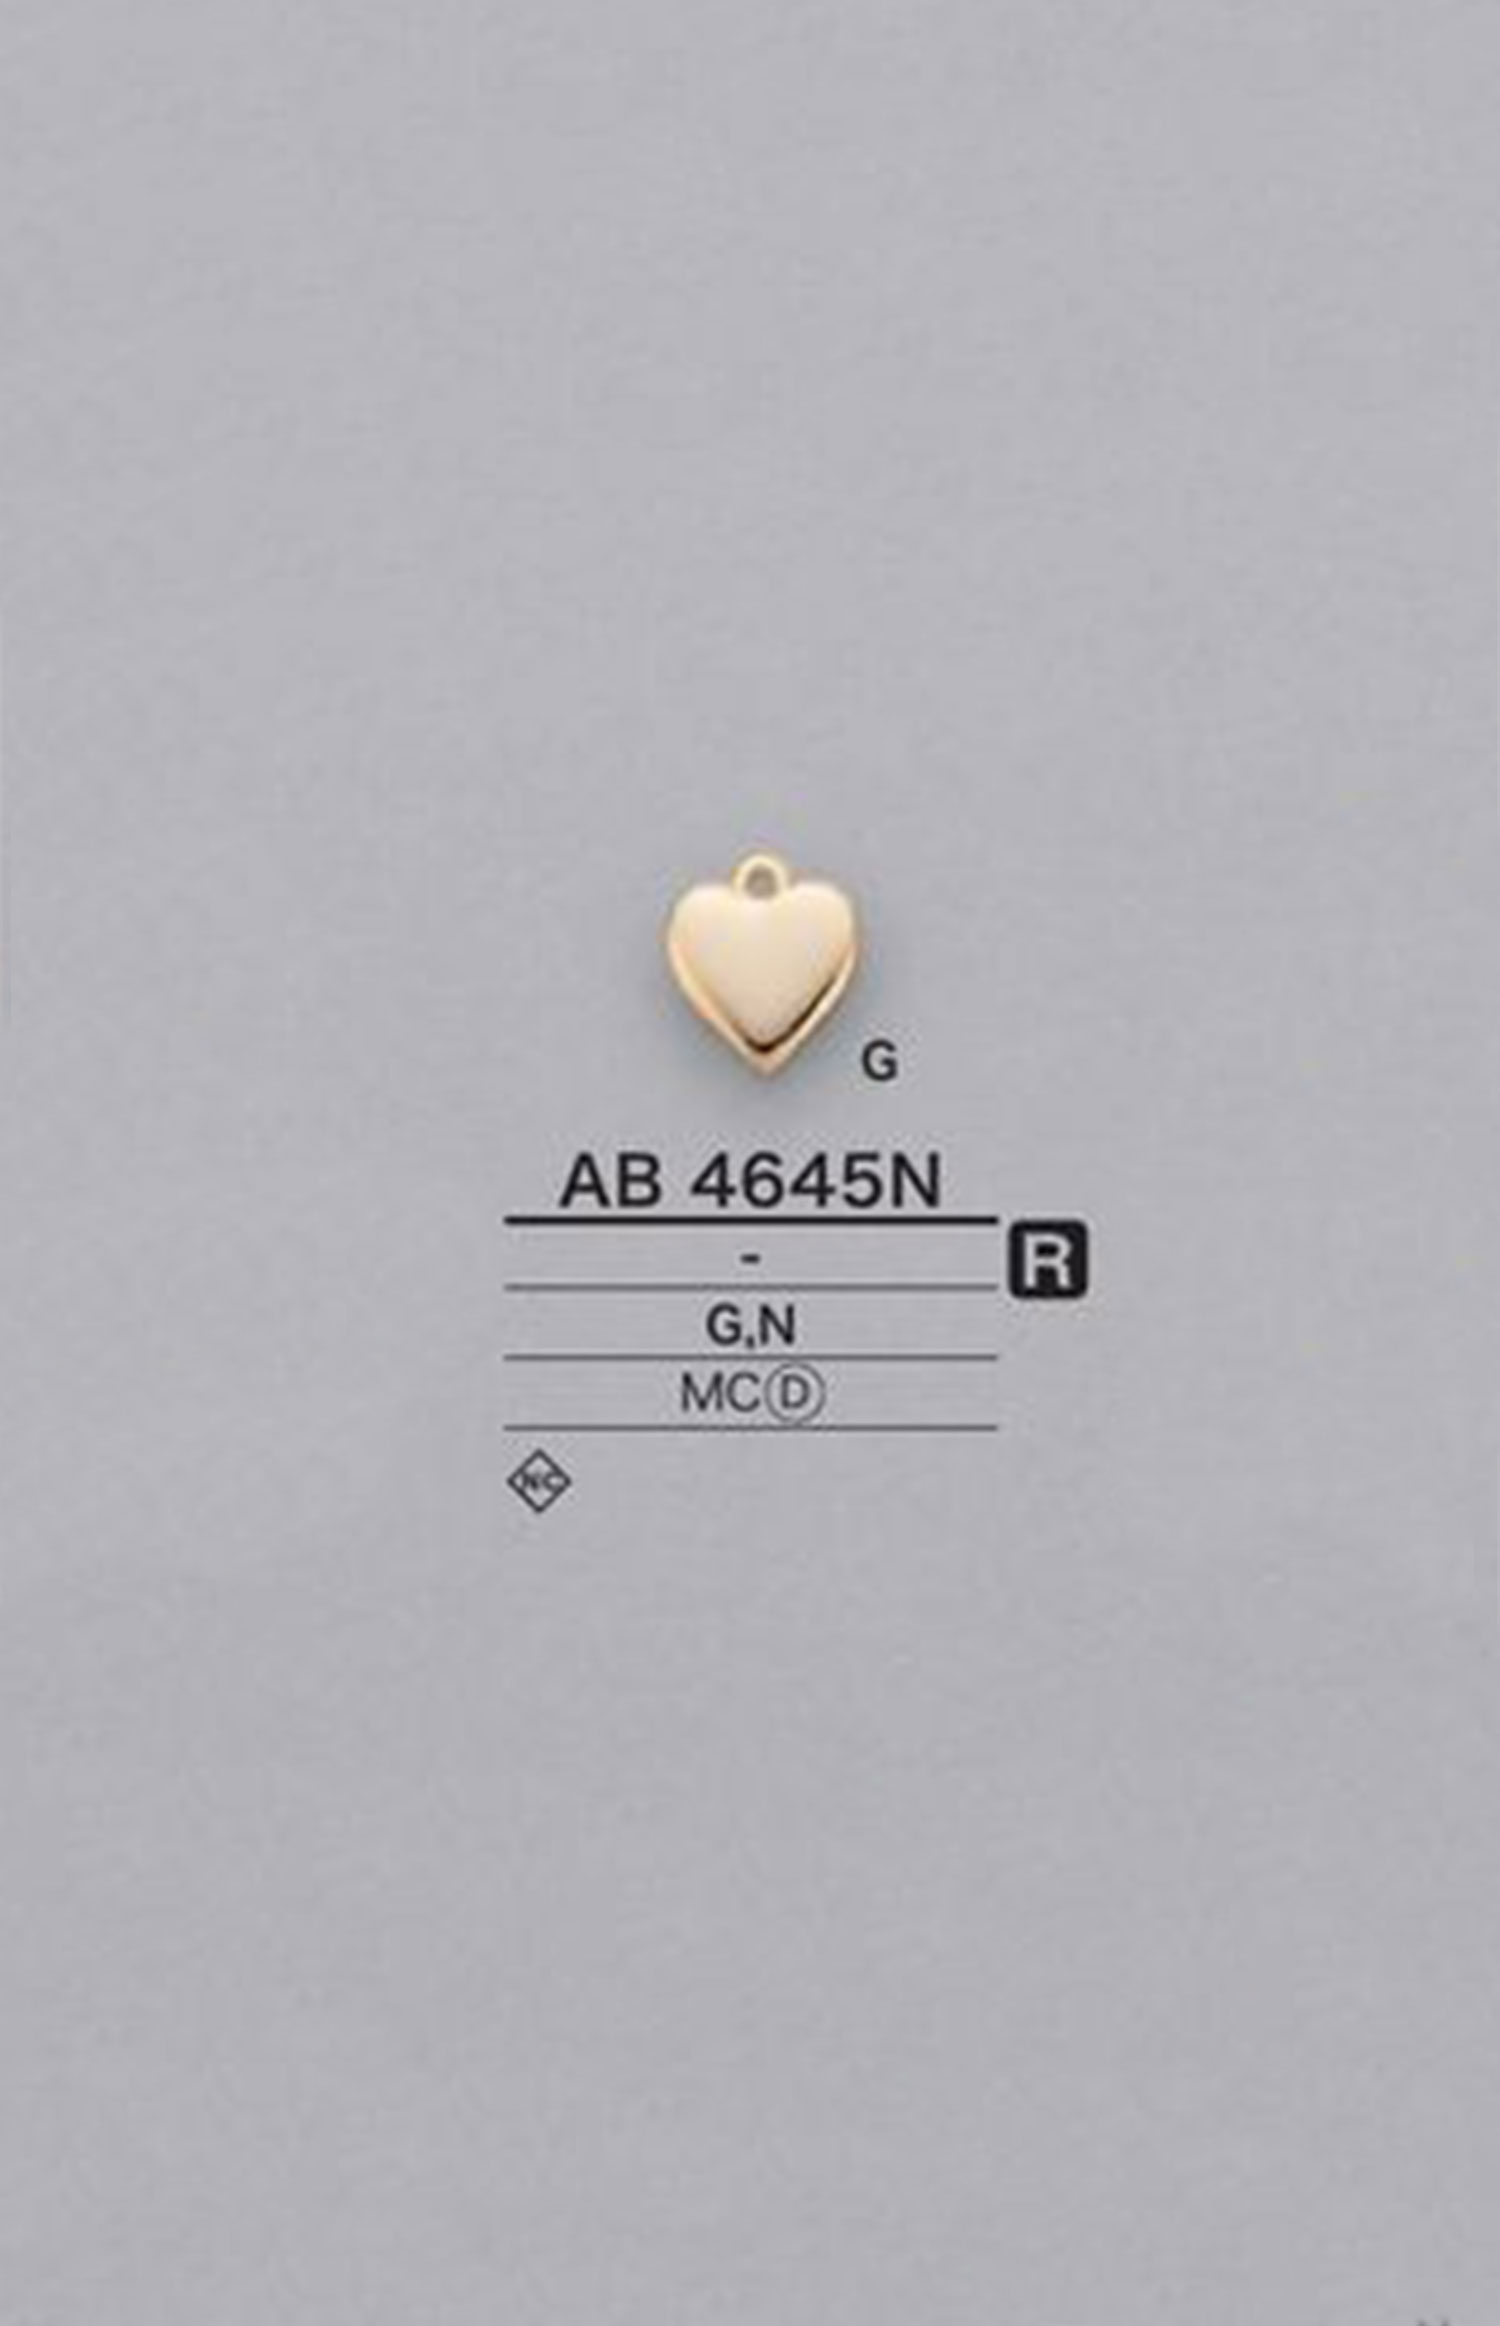 AB4645N Heart-shaped Motif Parts[Miscellaneous Goods And Others] IRIS